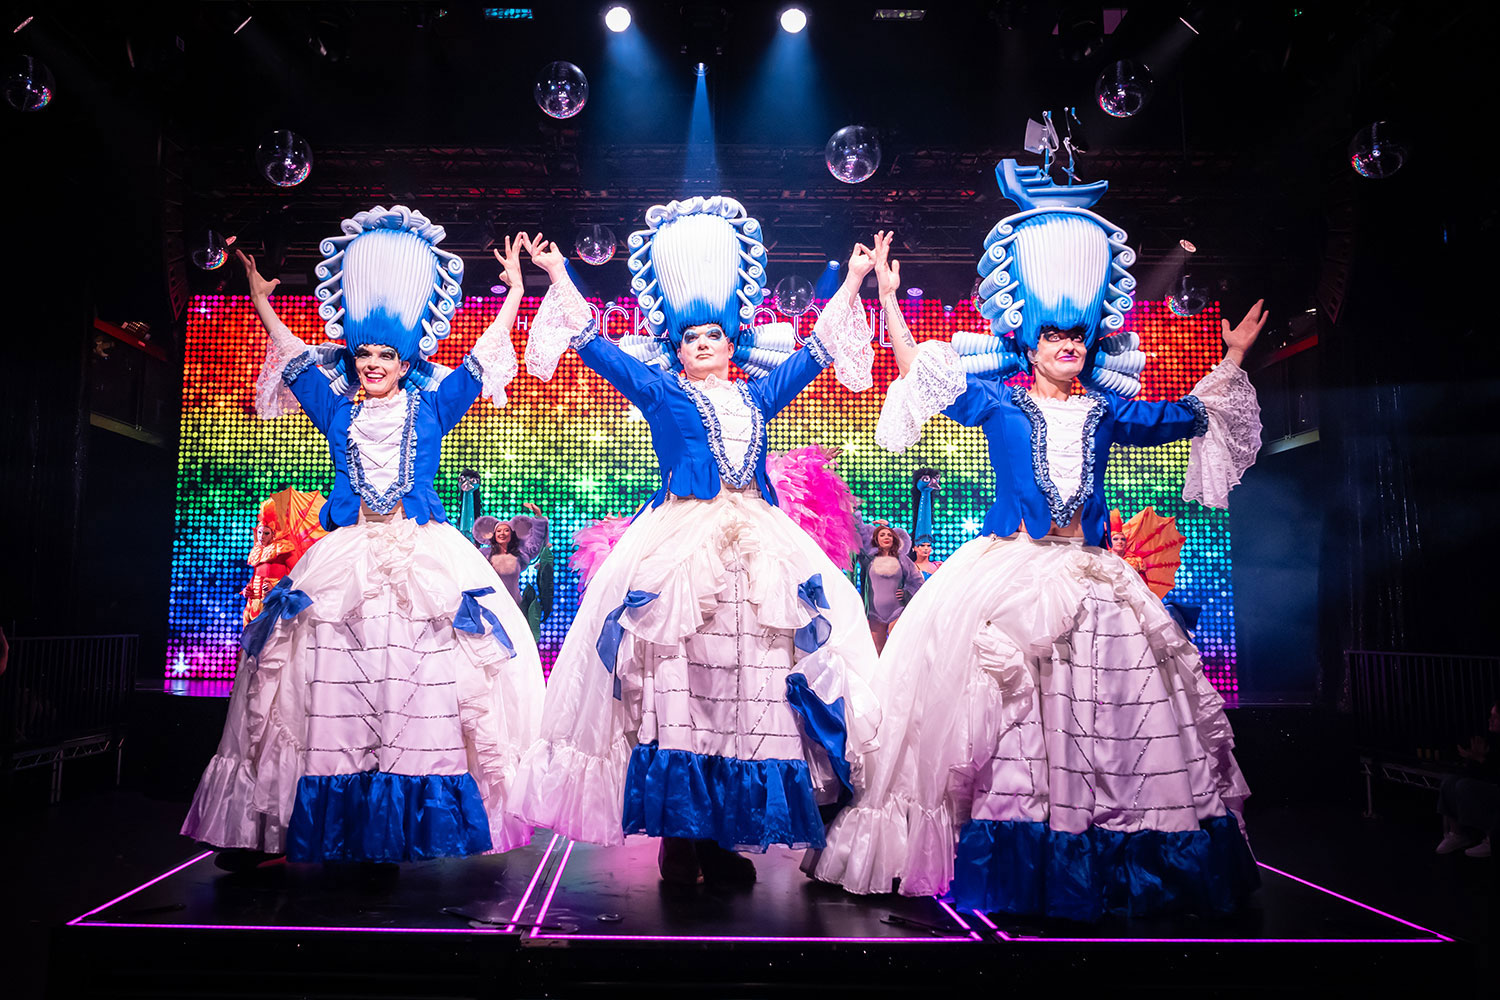 The cast of Priscilla the Party, © Marc Brenner